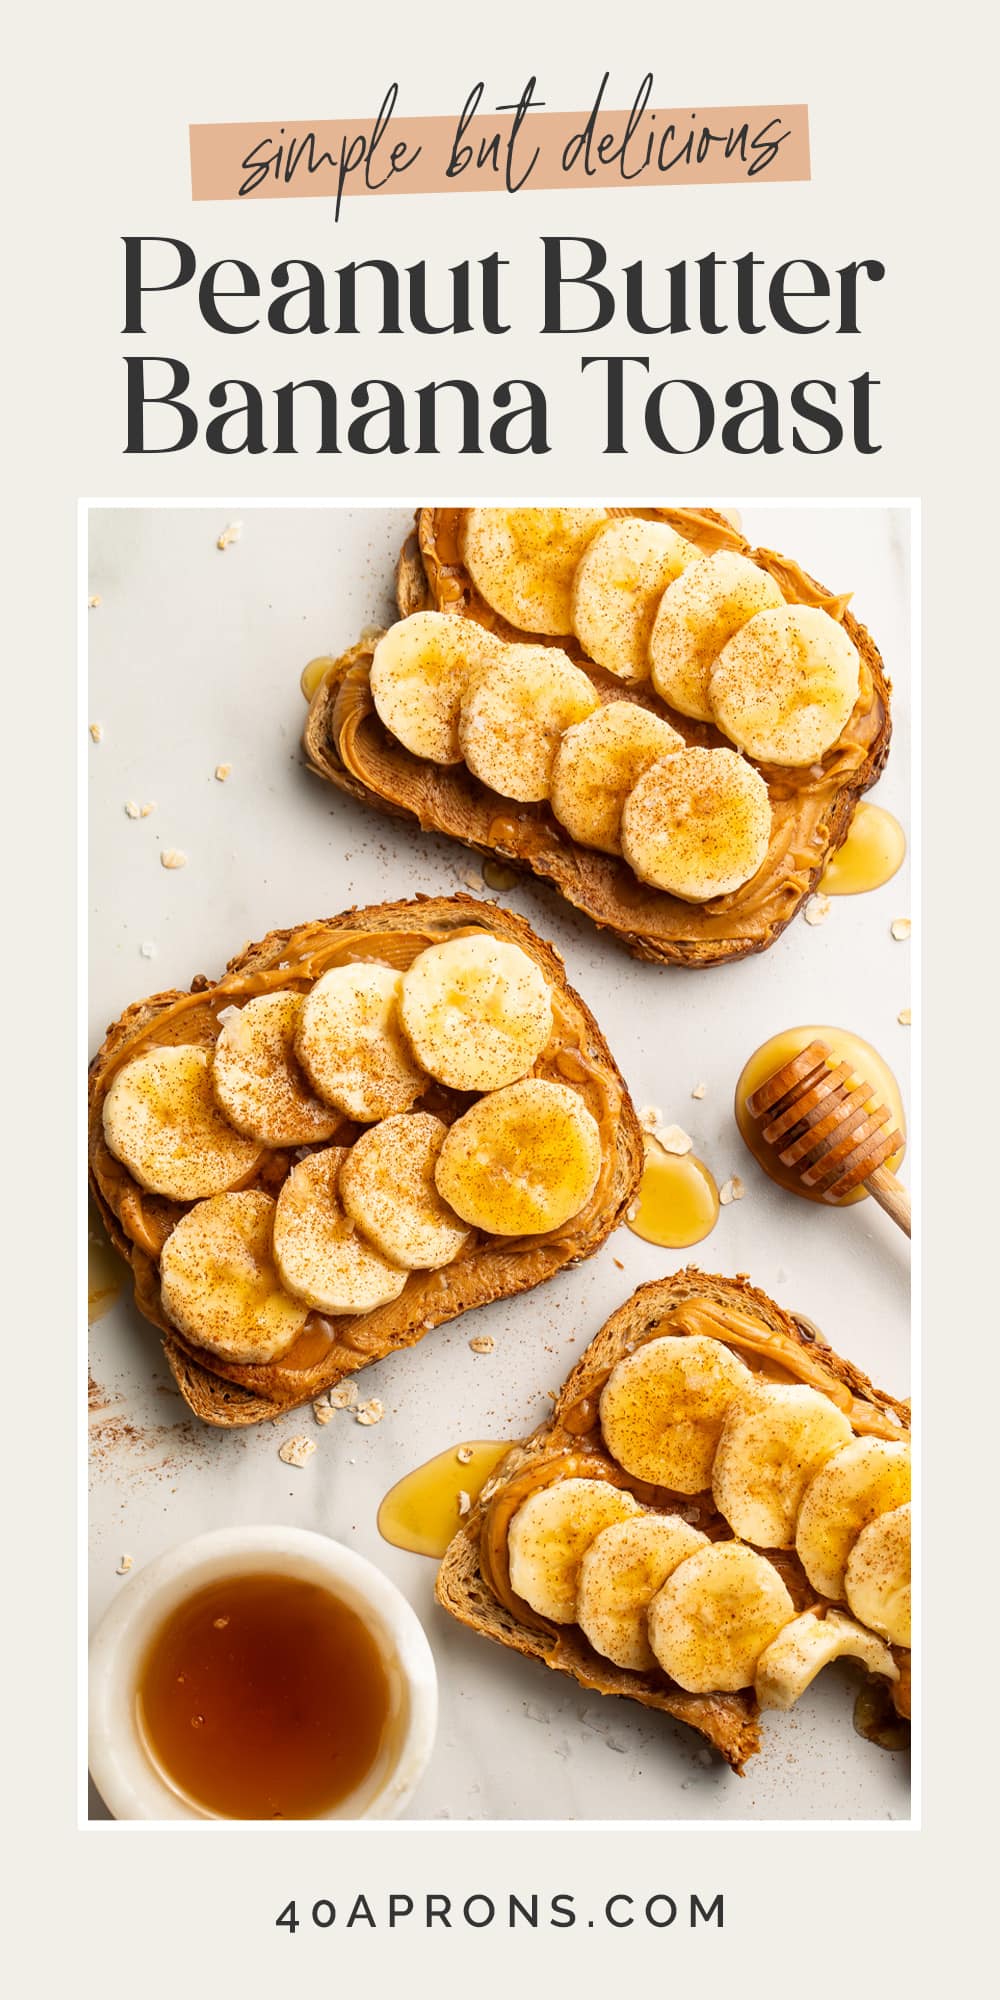 Pin graphic for peanut butter banana toast.